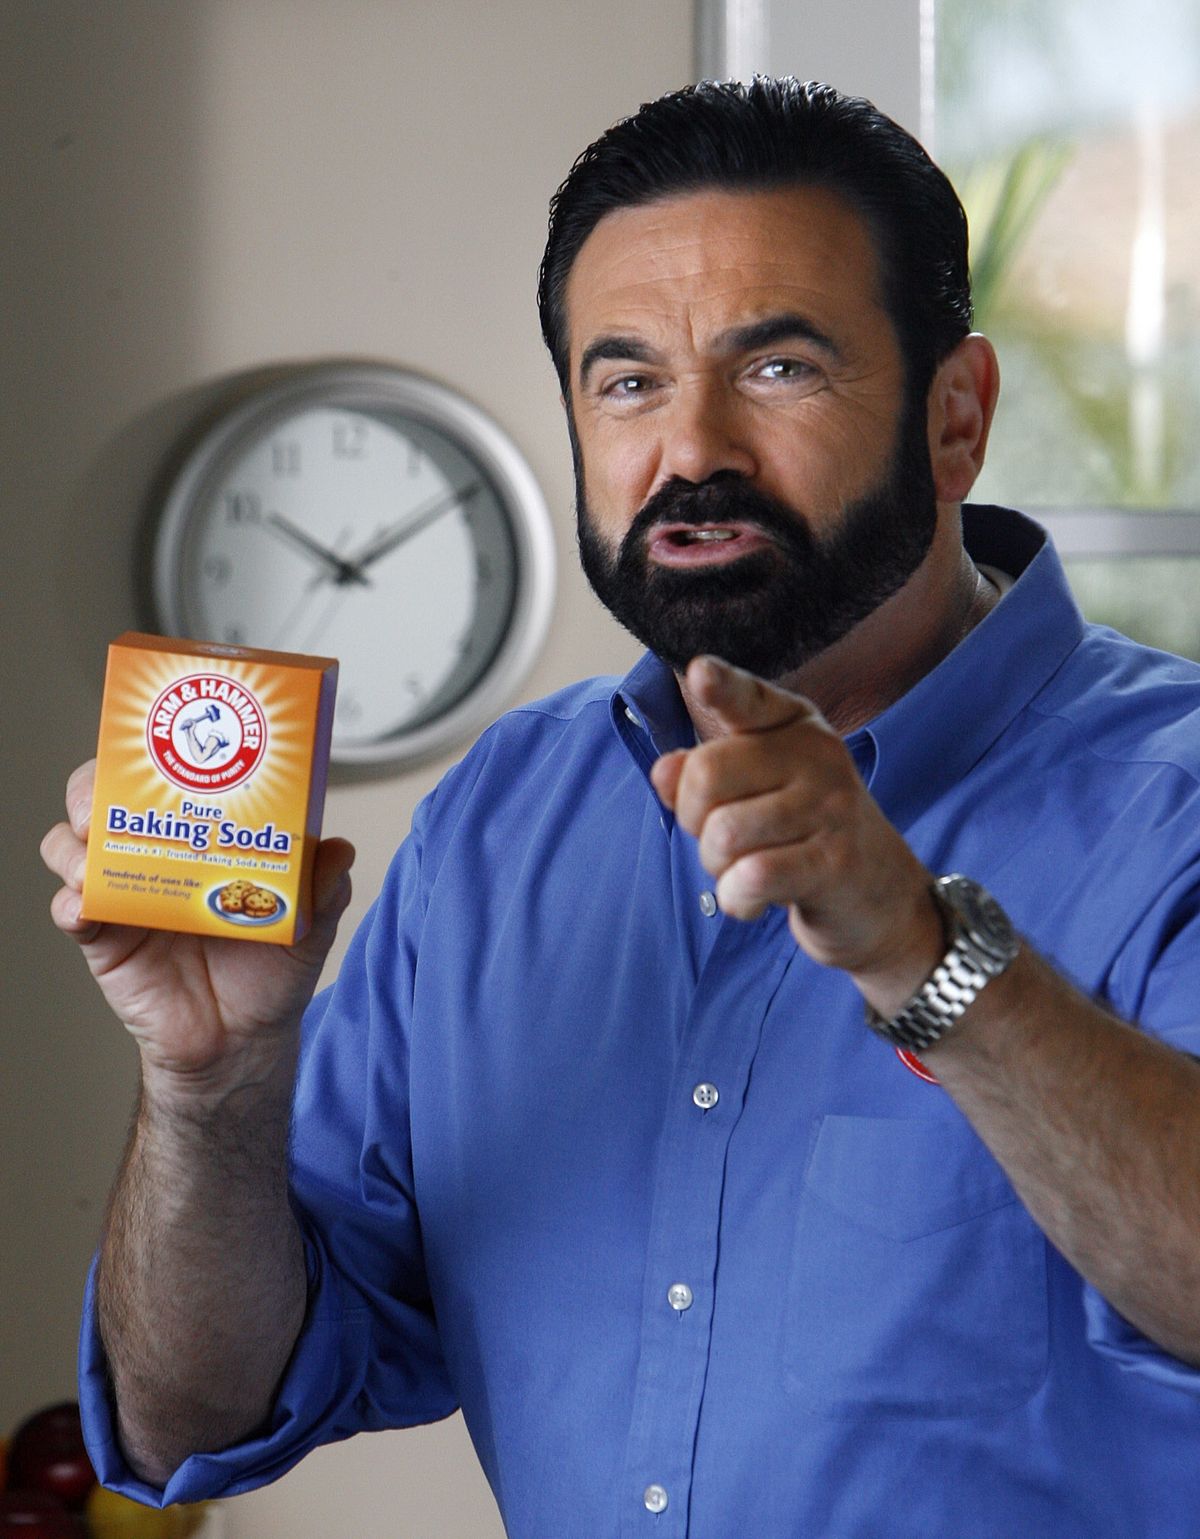 Billy Mays Died June 28 Associated Press photos (Associated Press photos / The Spokesman-Review)